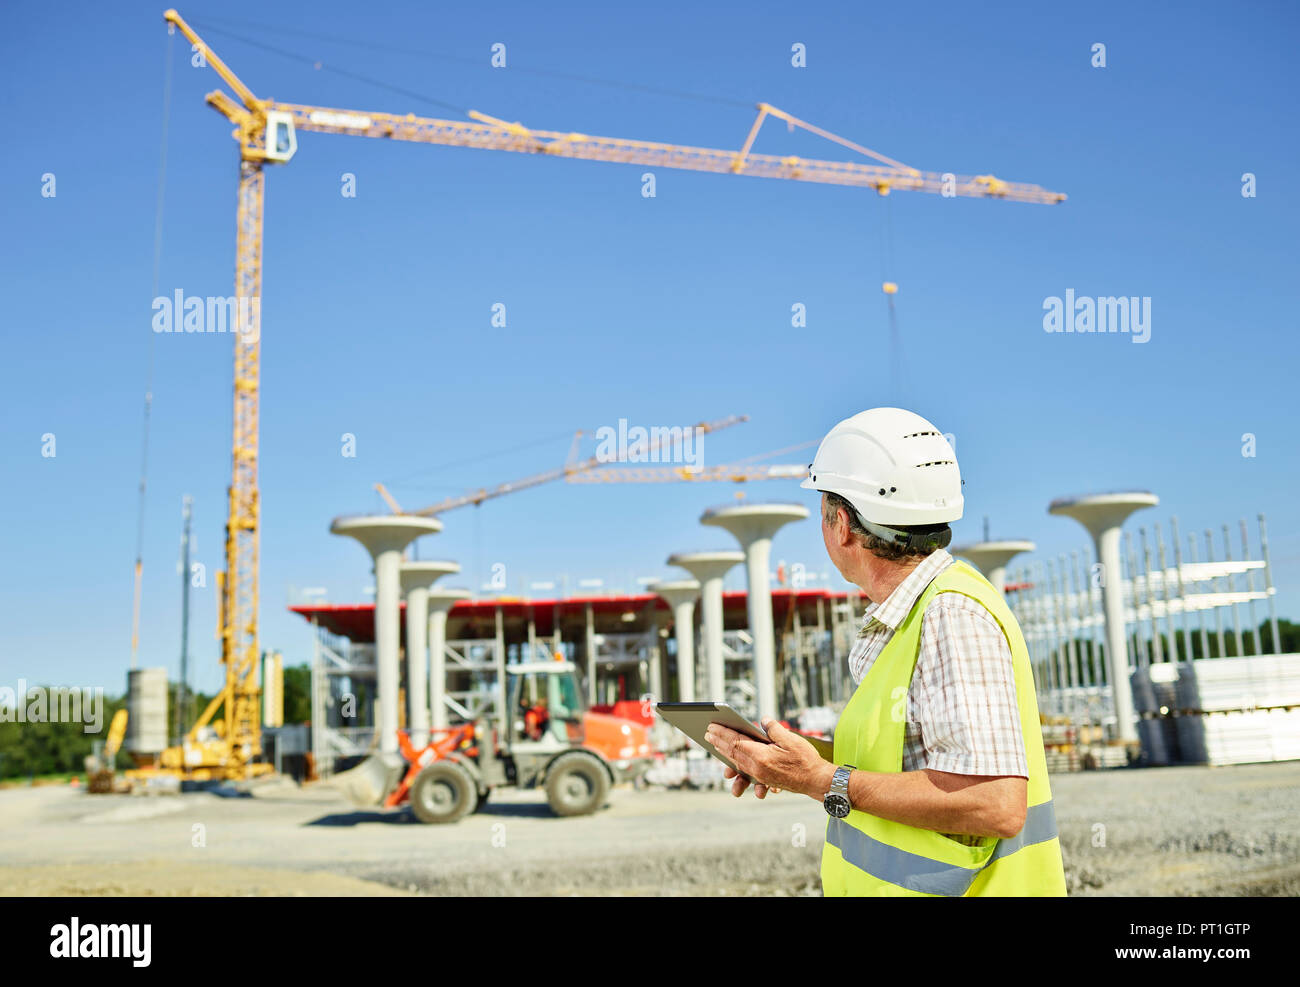 Worker on construction site using digital tablet Stock Photo